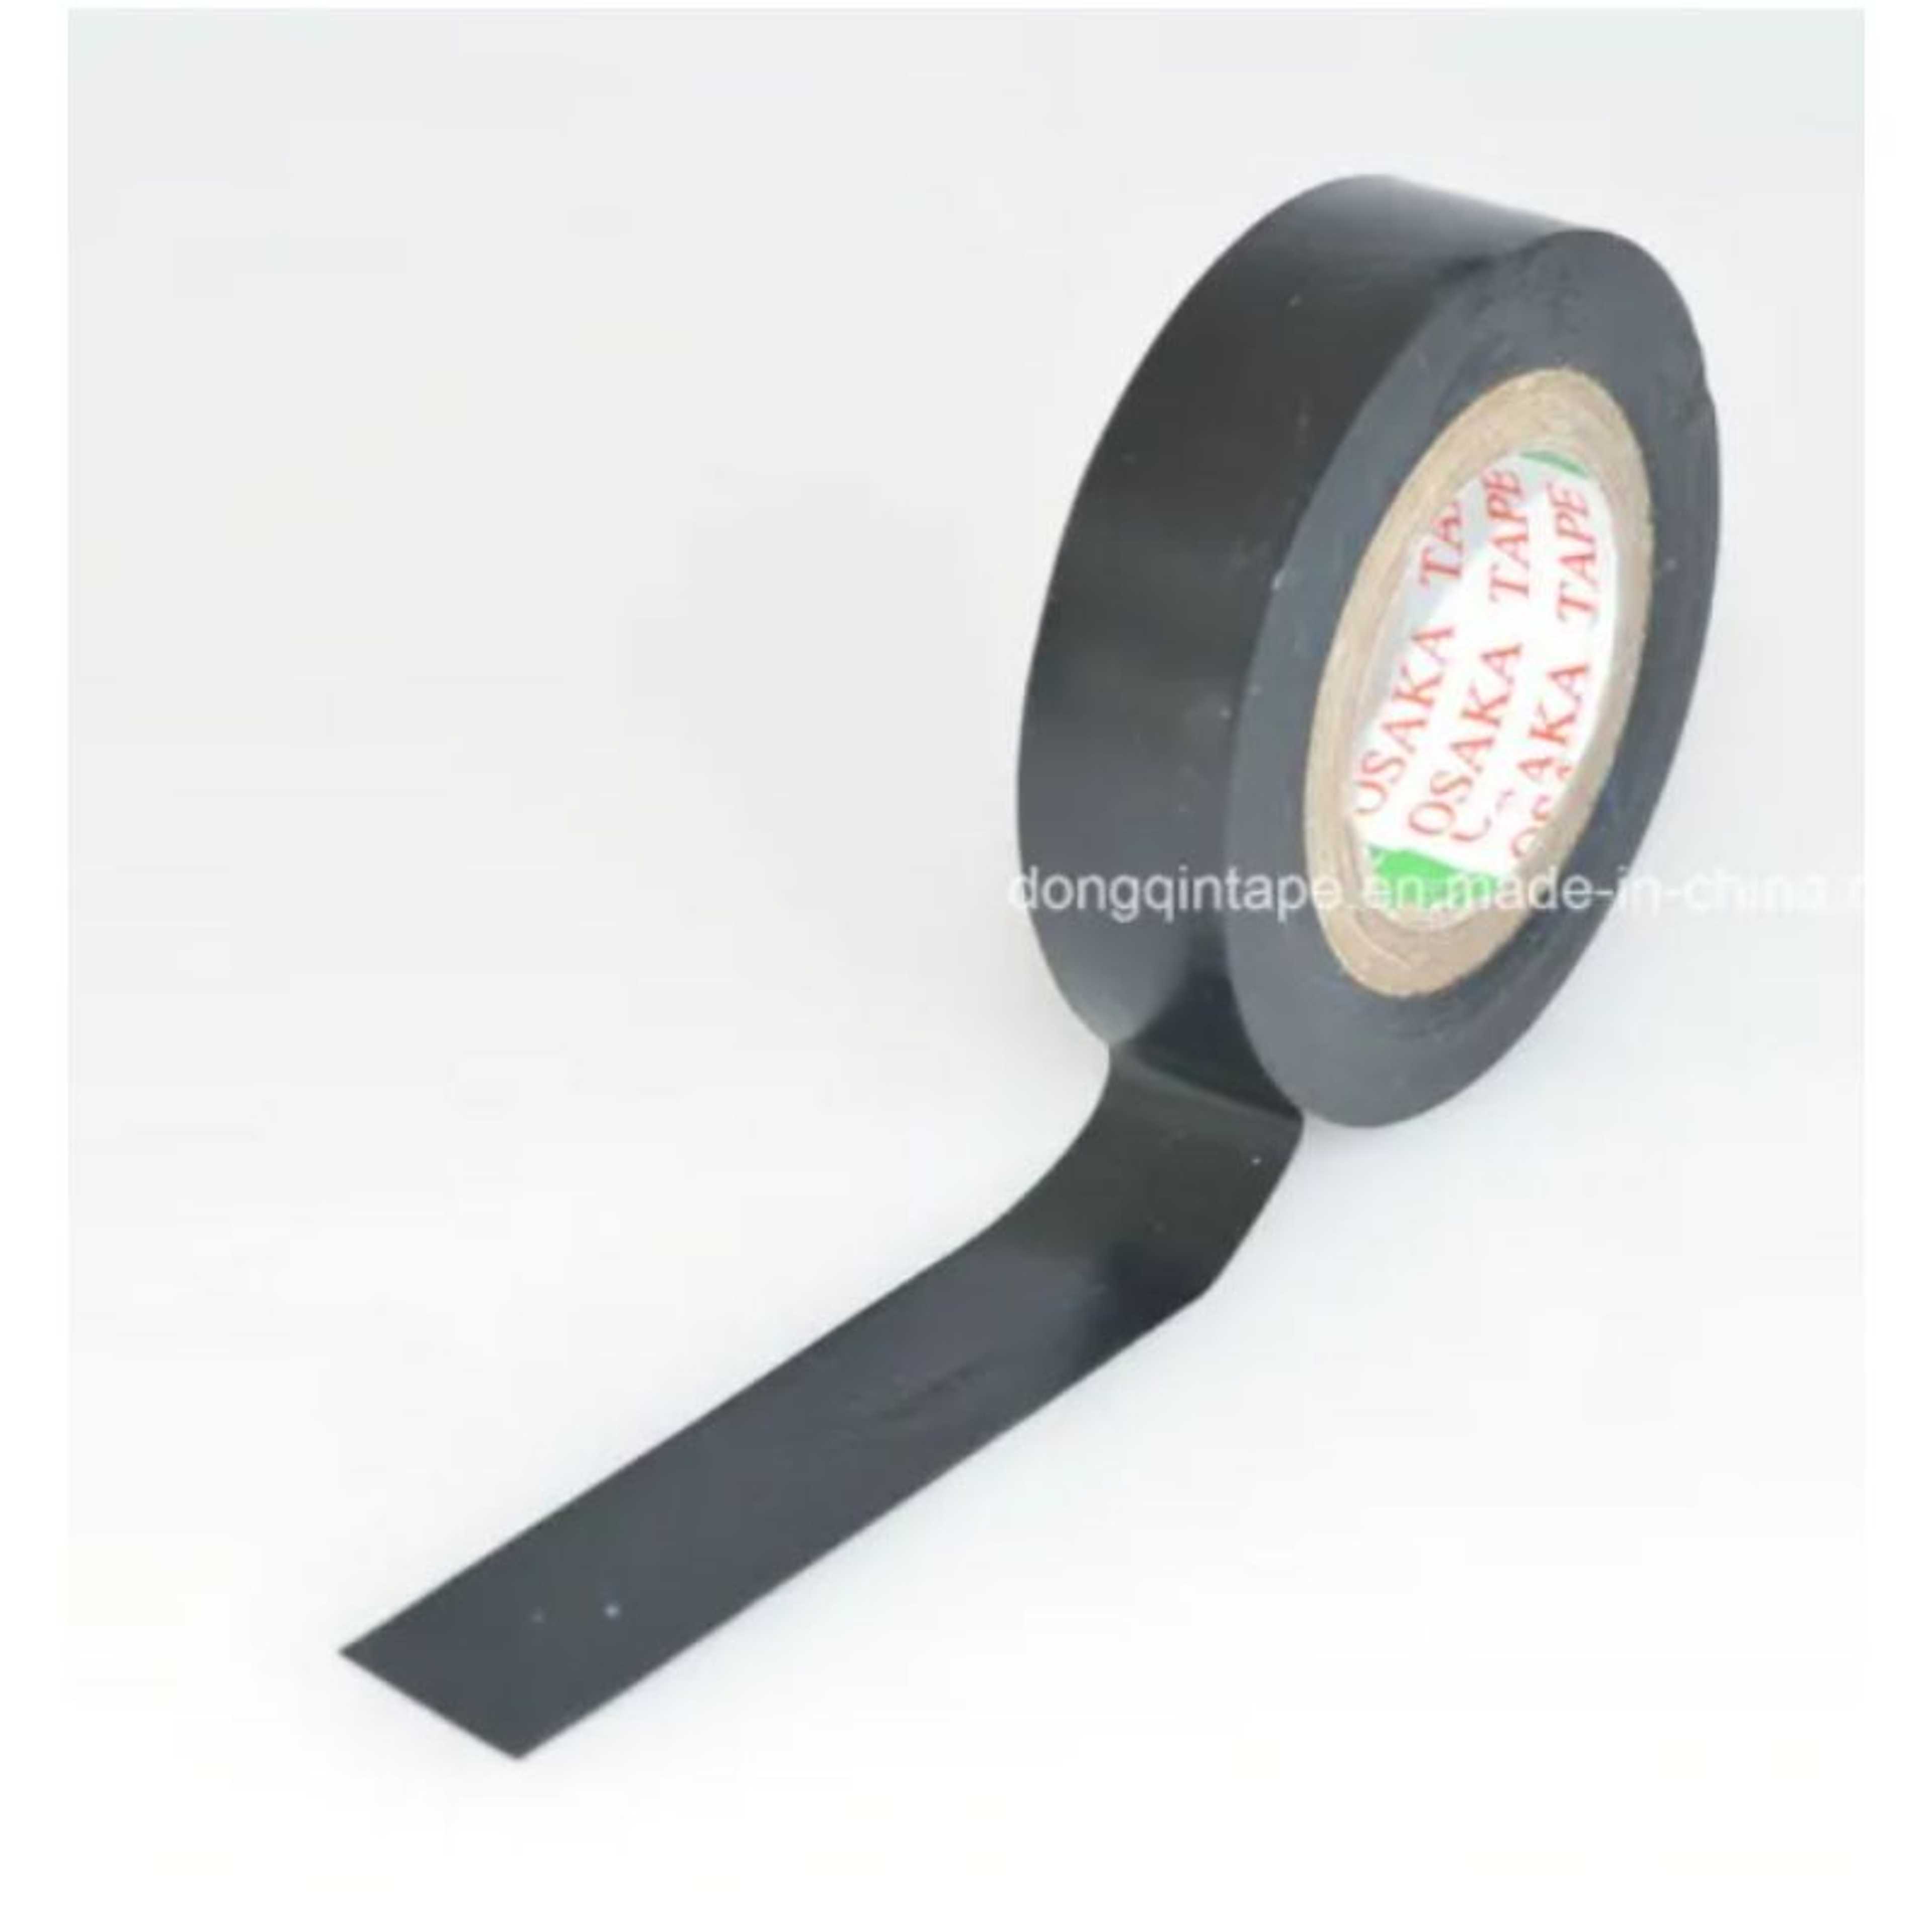 *10PCS* Electrical Tape High Temperature Insulation tape Waterproof PVC Tapes